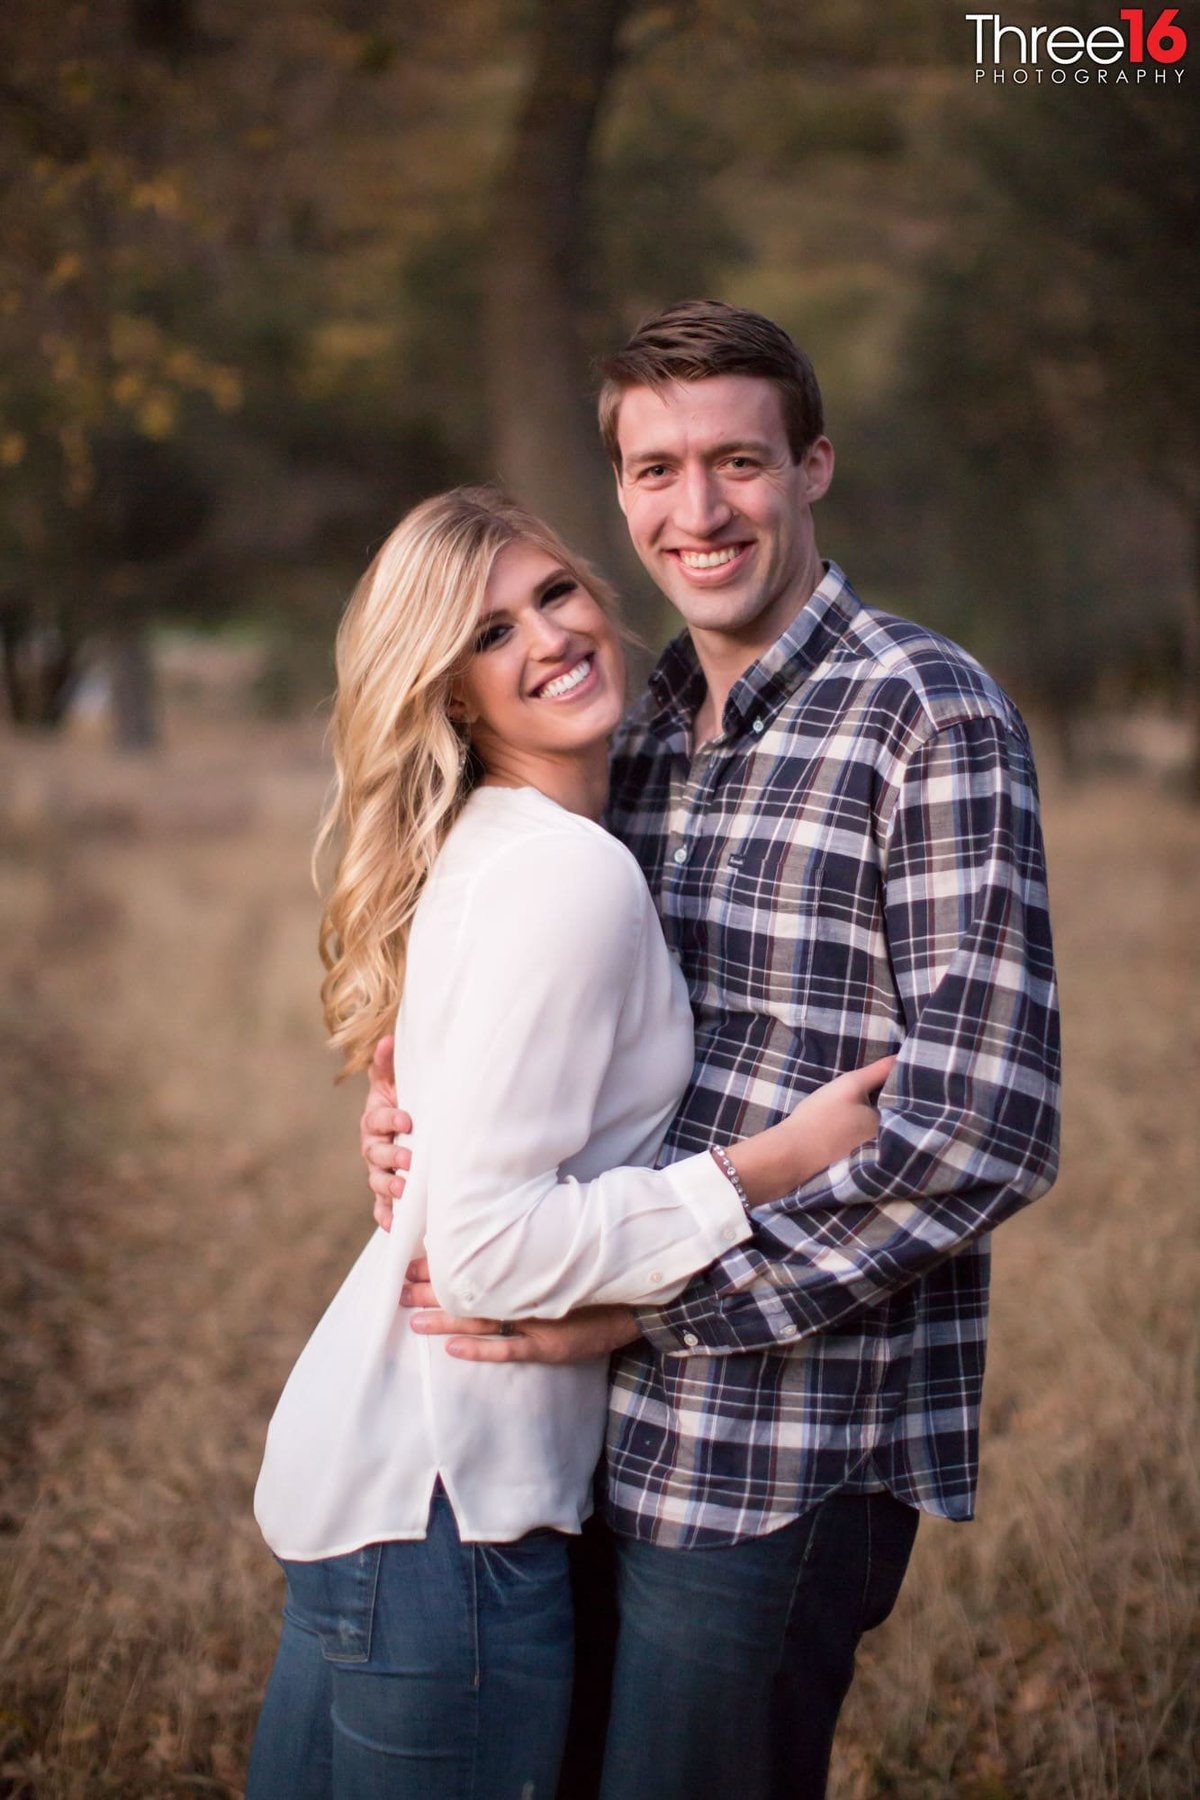 Engaged couple are all smiles during engagement photo session